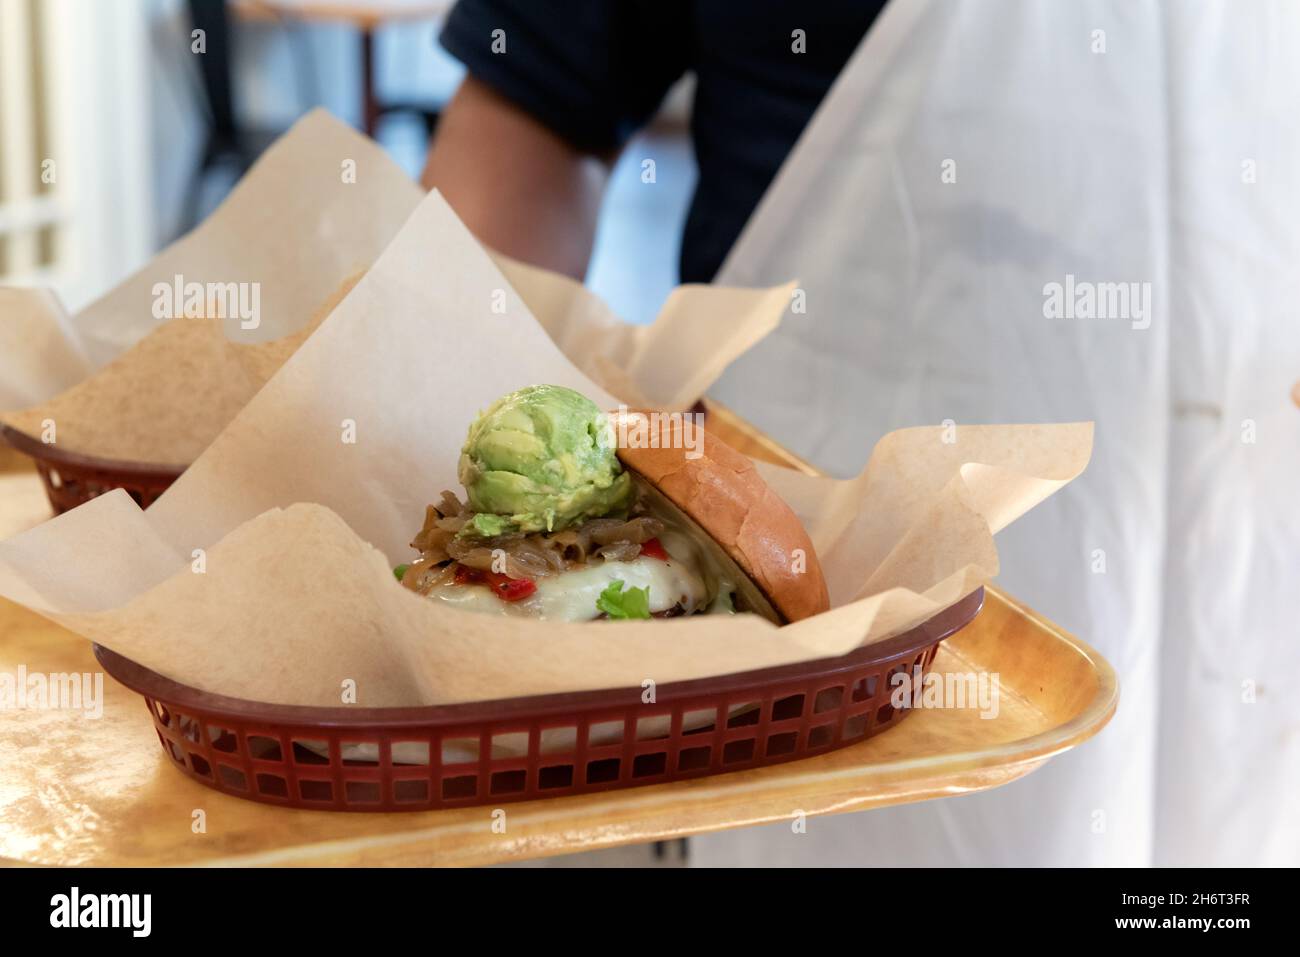 Waiter bringing the restaurant burgers and sandwiches on a tray wearing an apron. Stock Photo